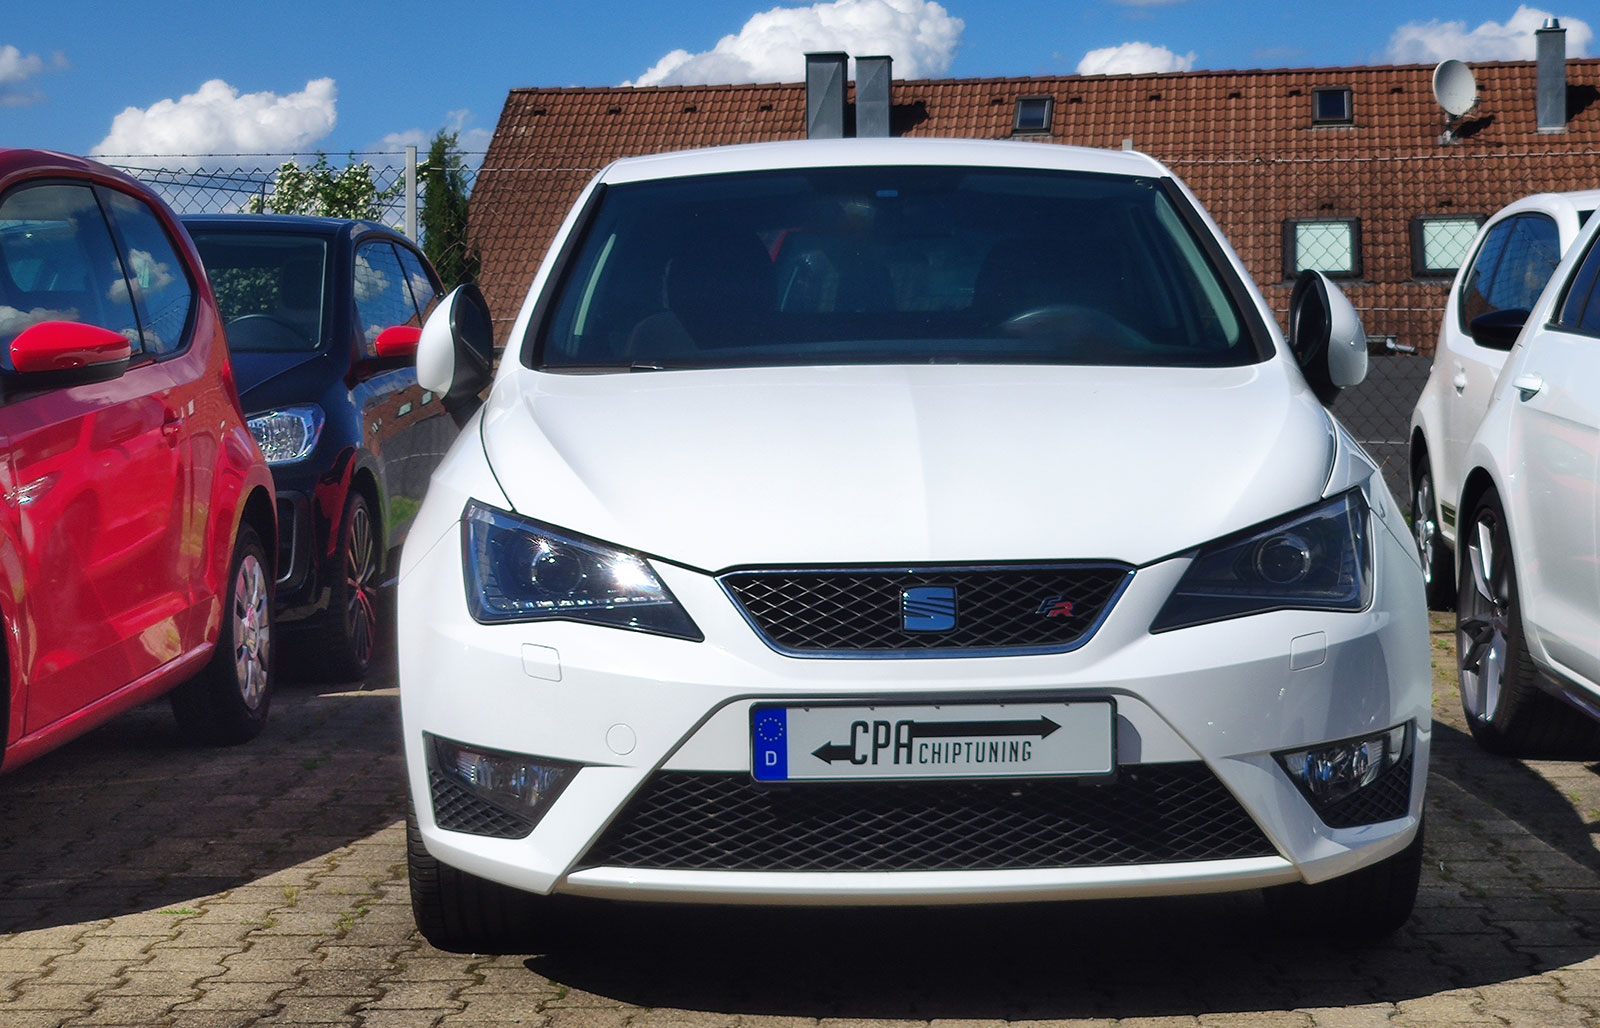 Guest at CPA - The Seat Ibiza